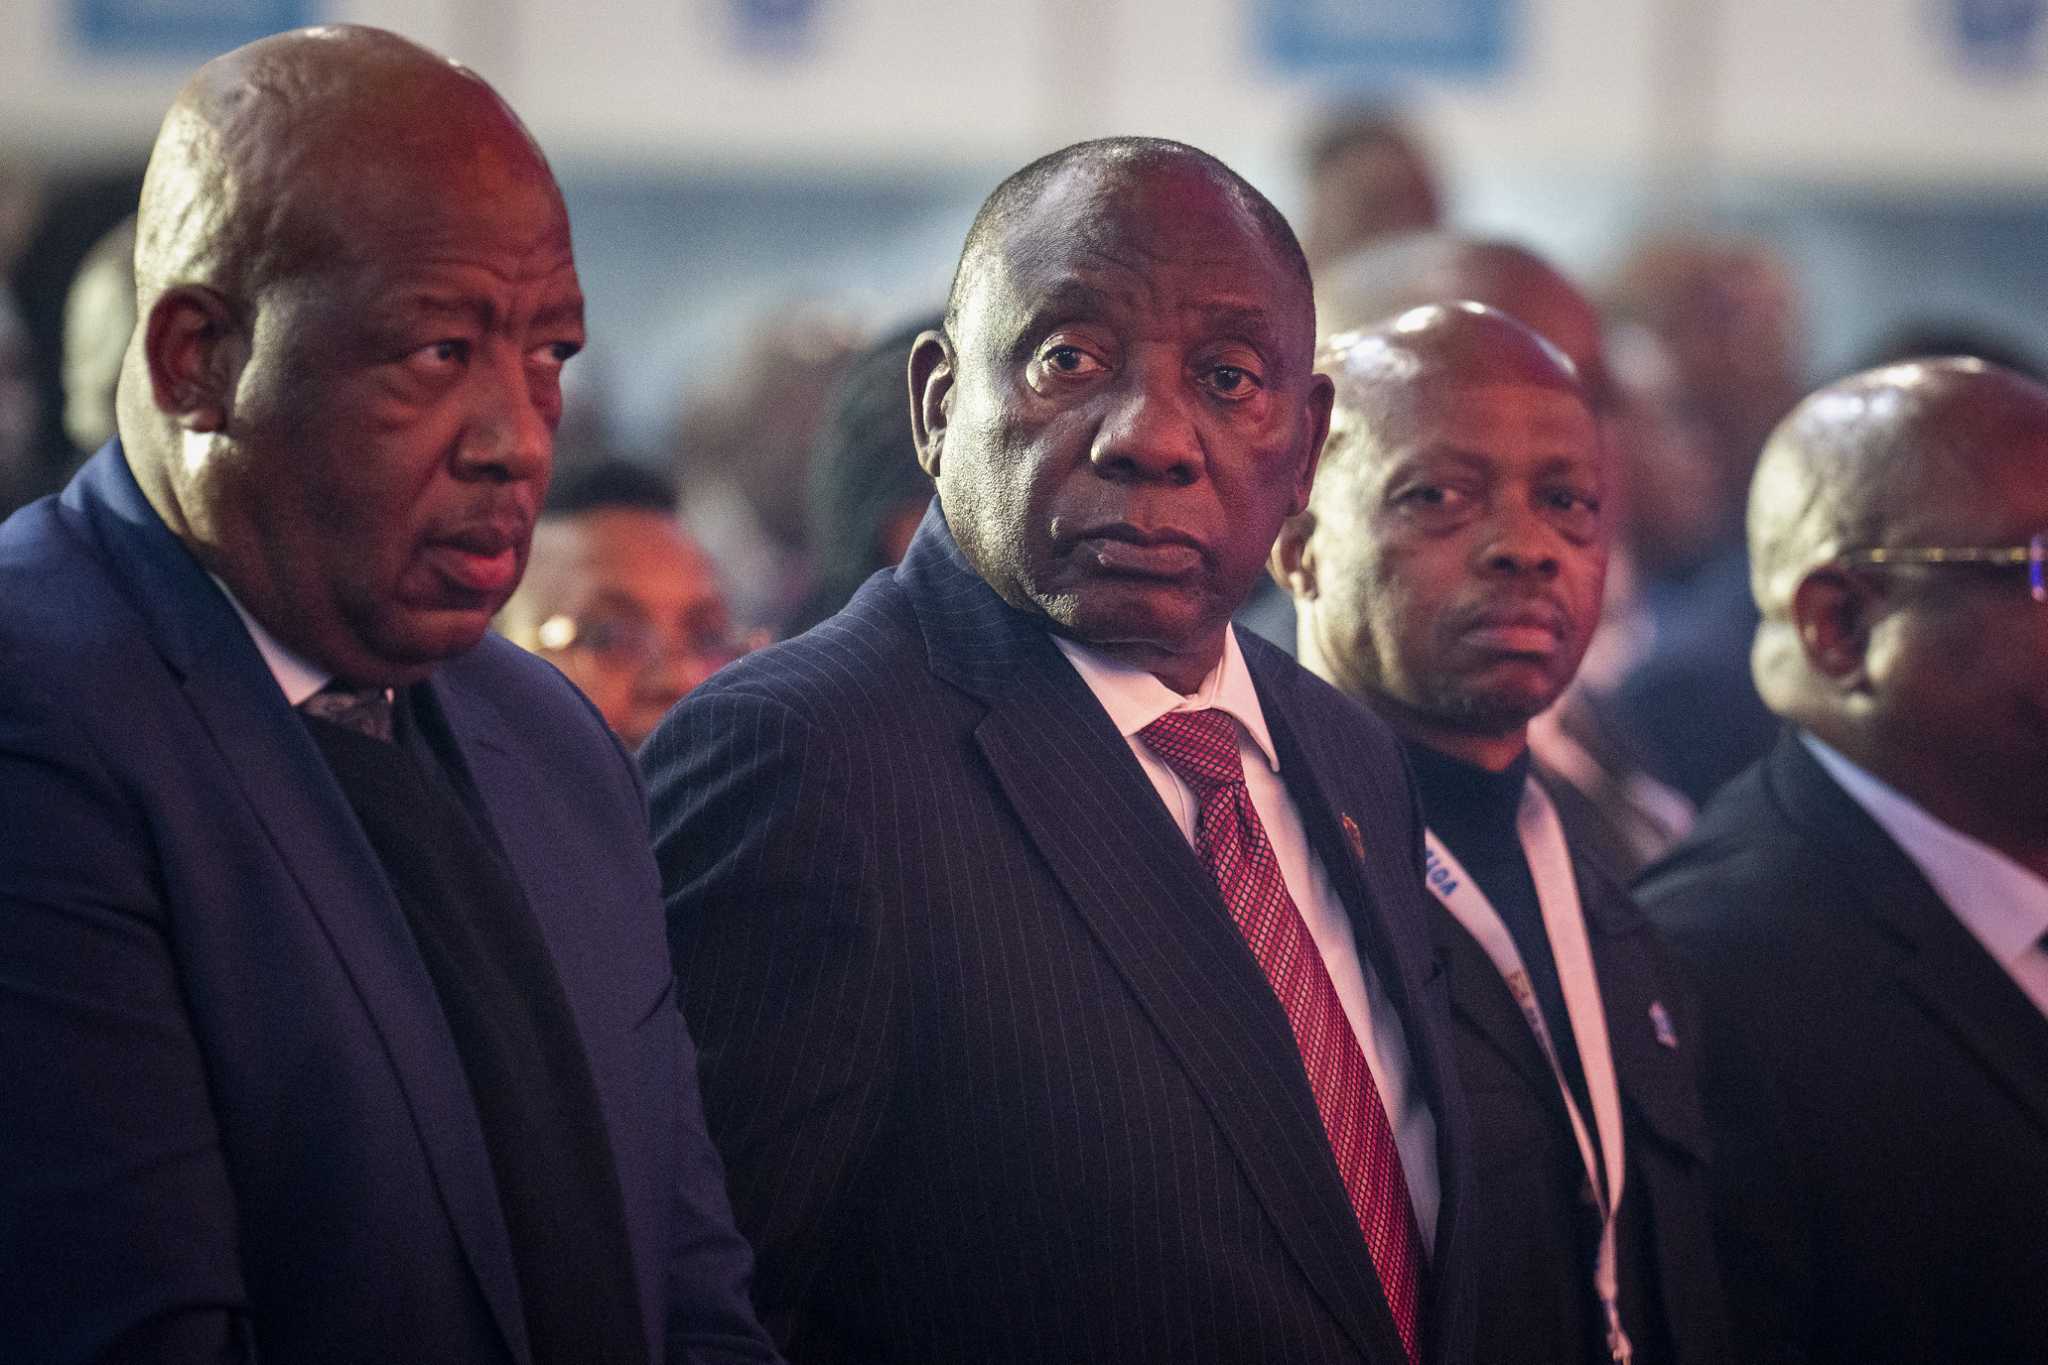 South Africa's president urges parties to find common ground in talks after election deadlock